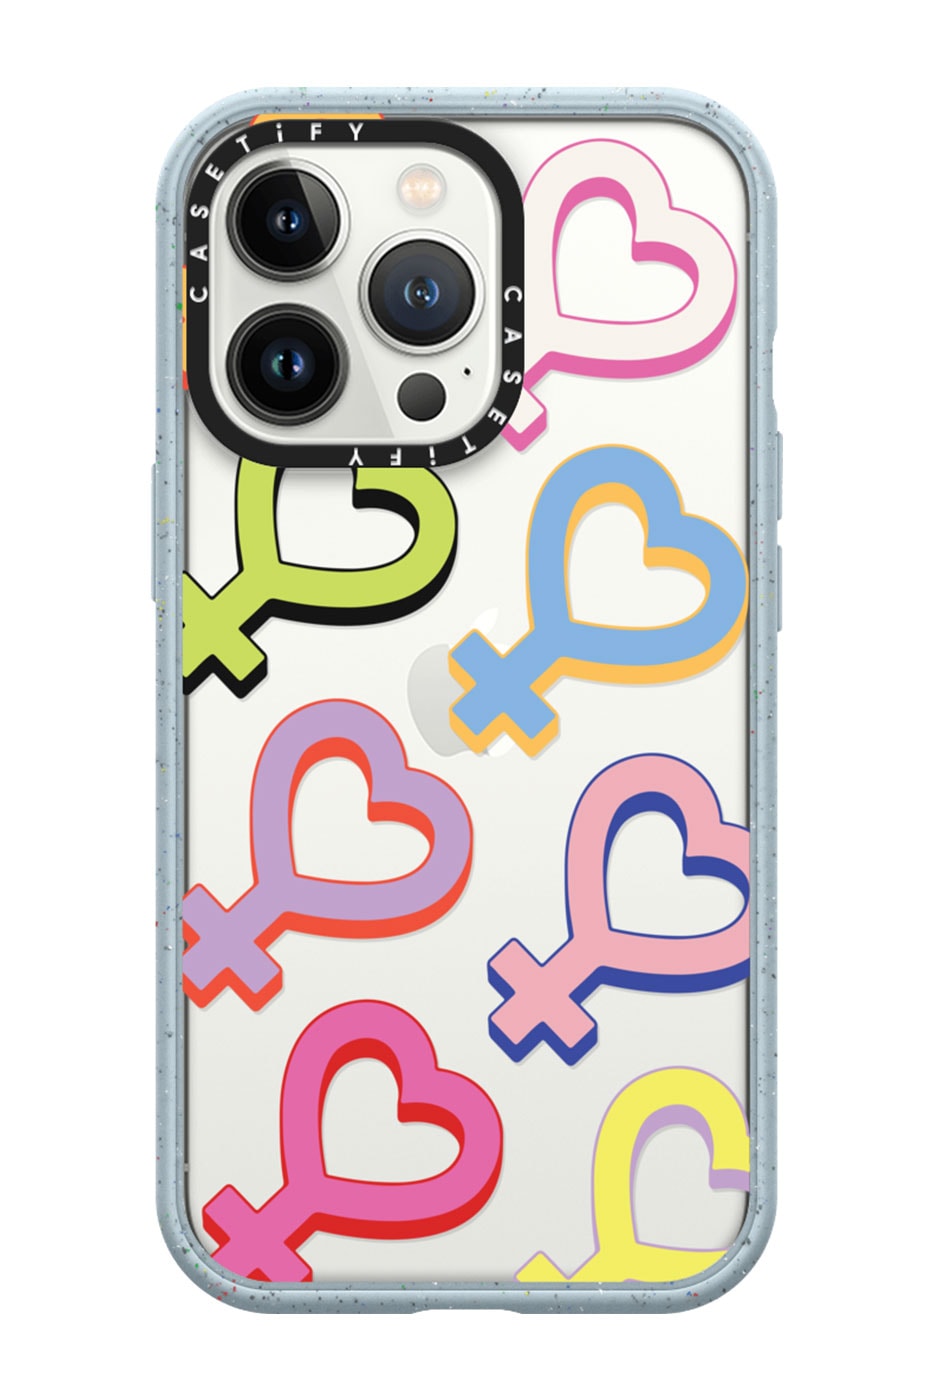 CASETiFY International Womens Day Her Impact Matters Collection Release Info Buy Price AirTag holder AirPod iPhone iPad Cases Apple Watch band Camila Rosa Mel Stringer Gemma Correll Huyen Dinh